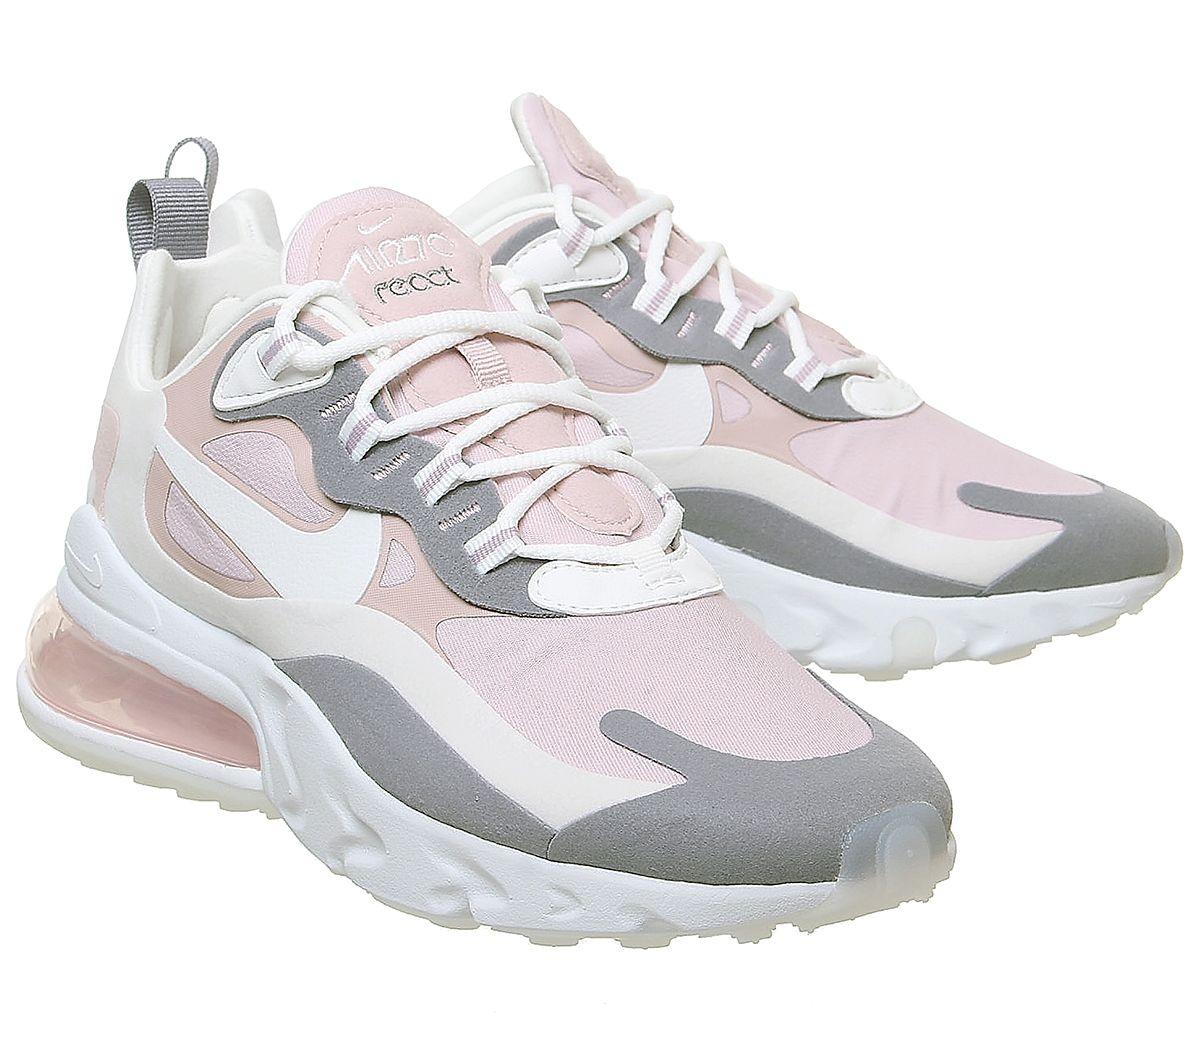 Air Max 270 React Trainers in Pink 